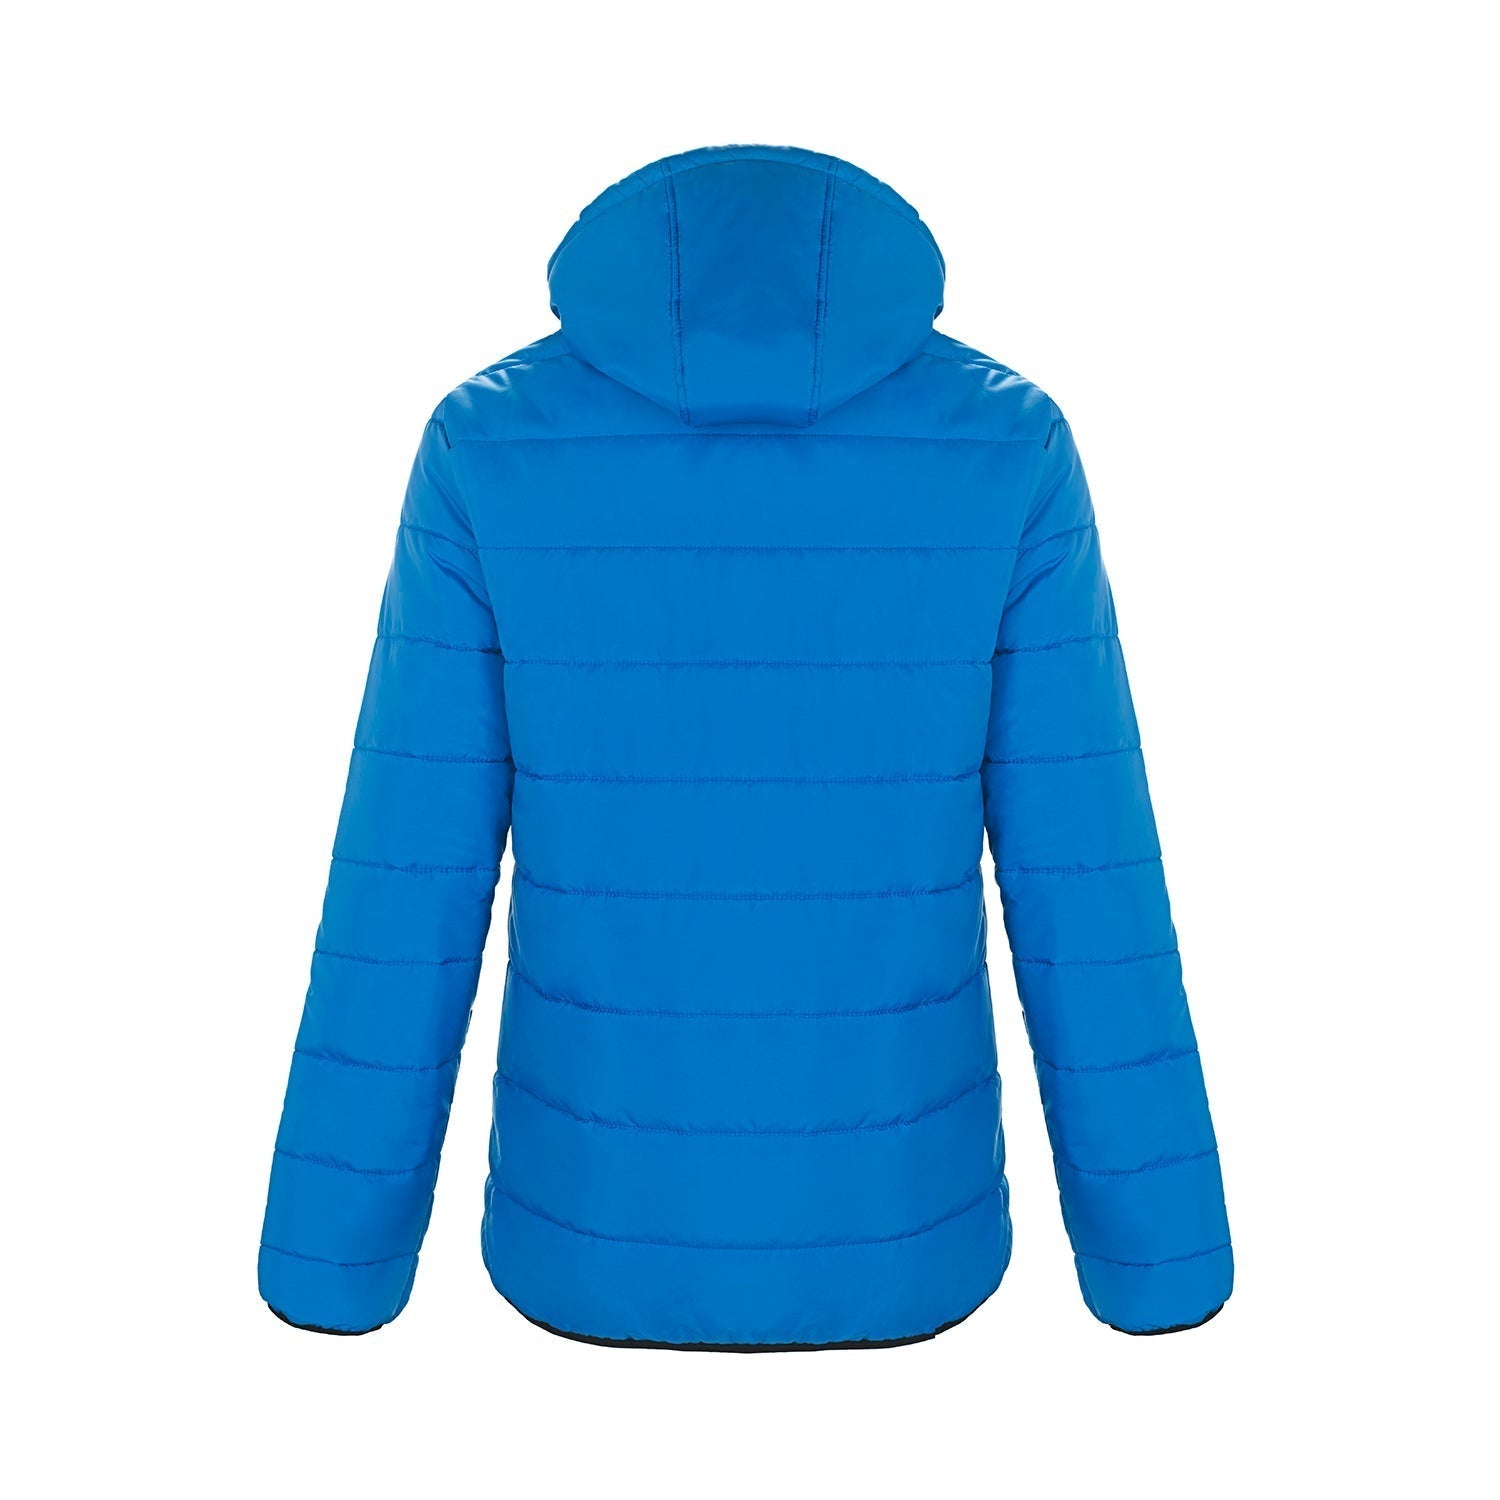 L00981 - Glacial Ladies Puffy Jacket With Detachable Hood